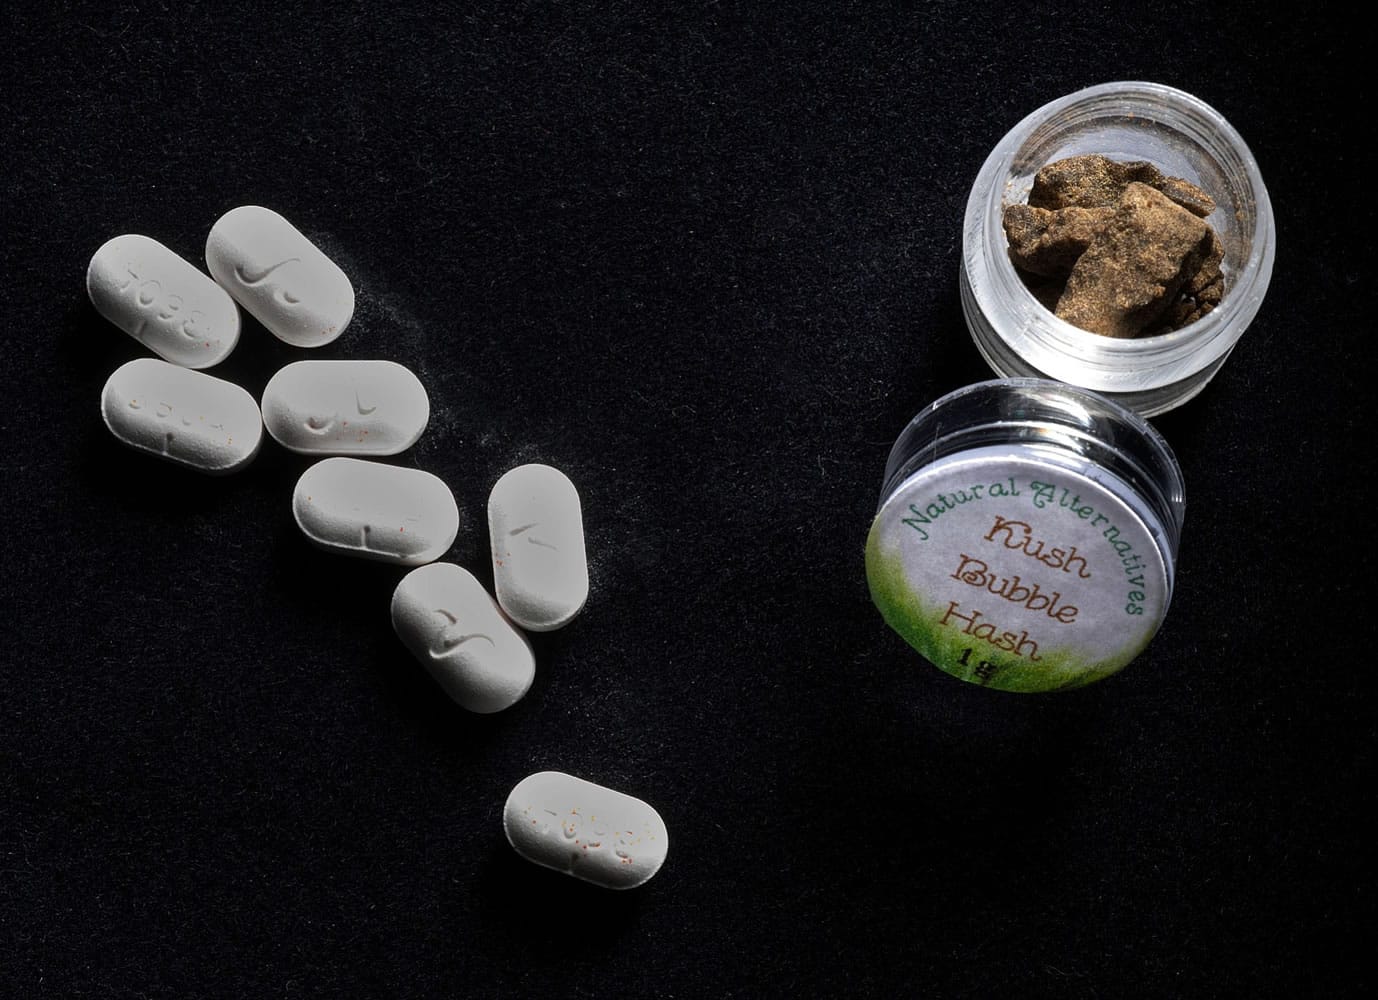 Hydrocodone, left, to treat chronic migraine headaches, and marijuana hash used to treat insomnia, both belonging to &quot;Christopher,&quot; who suffers from both.